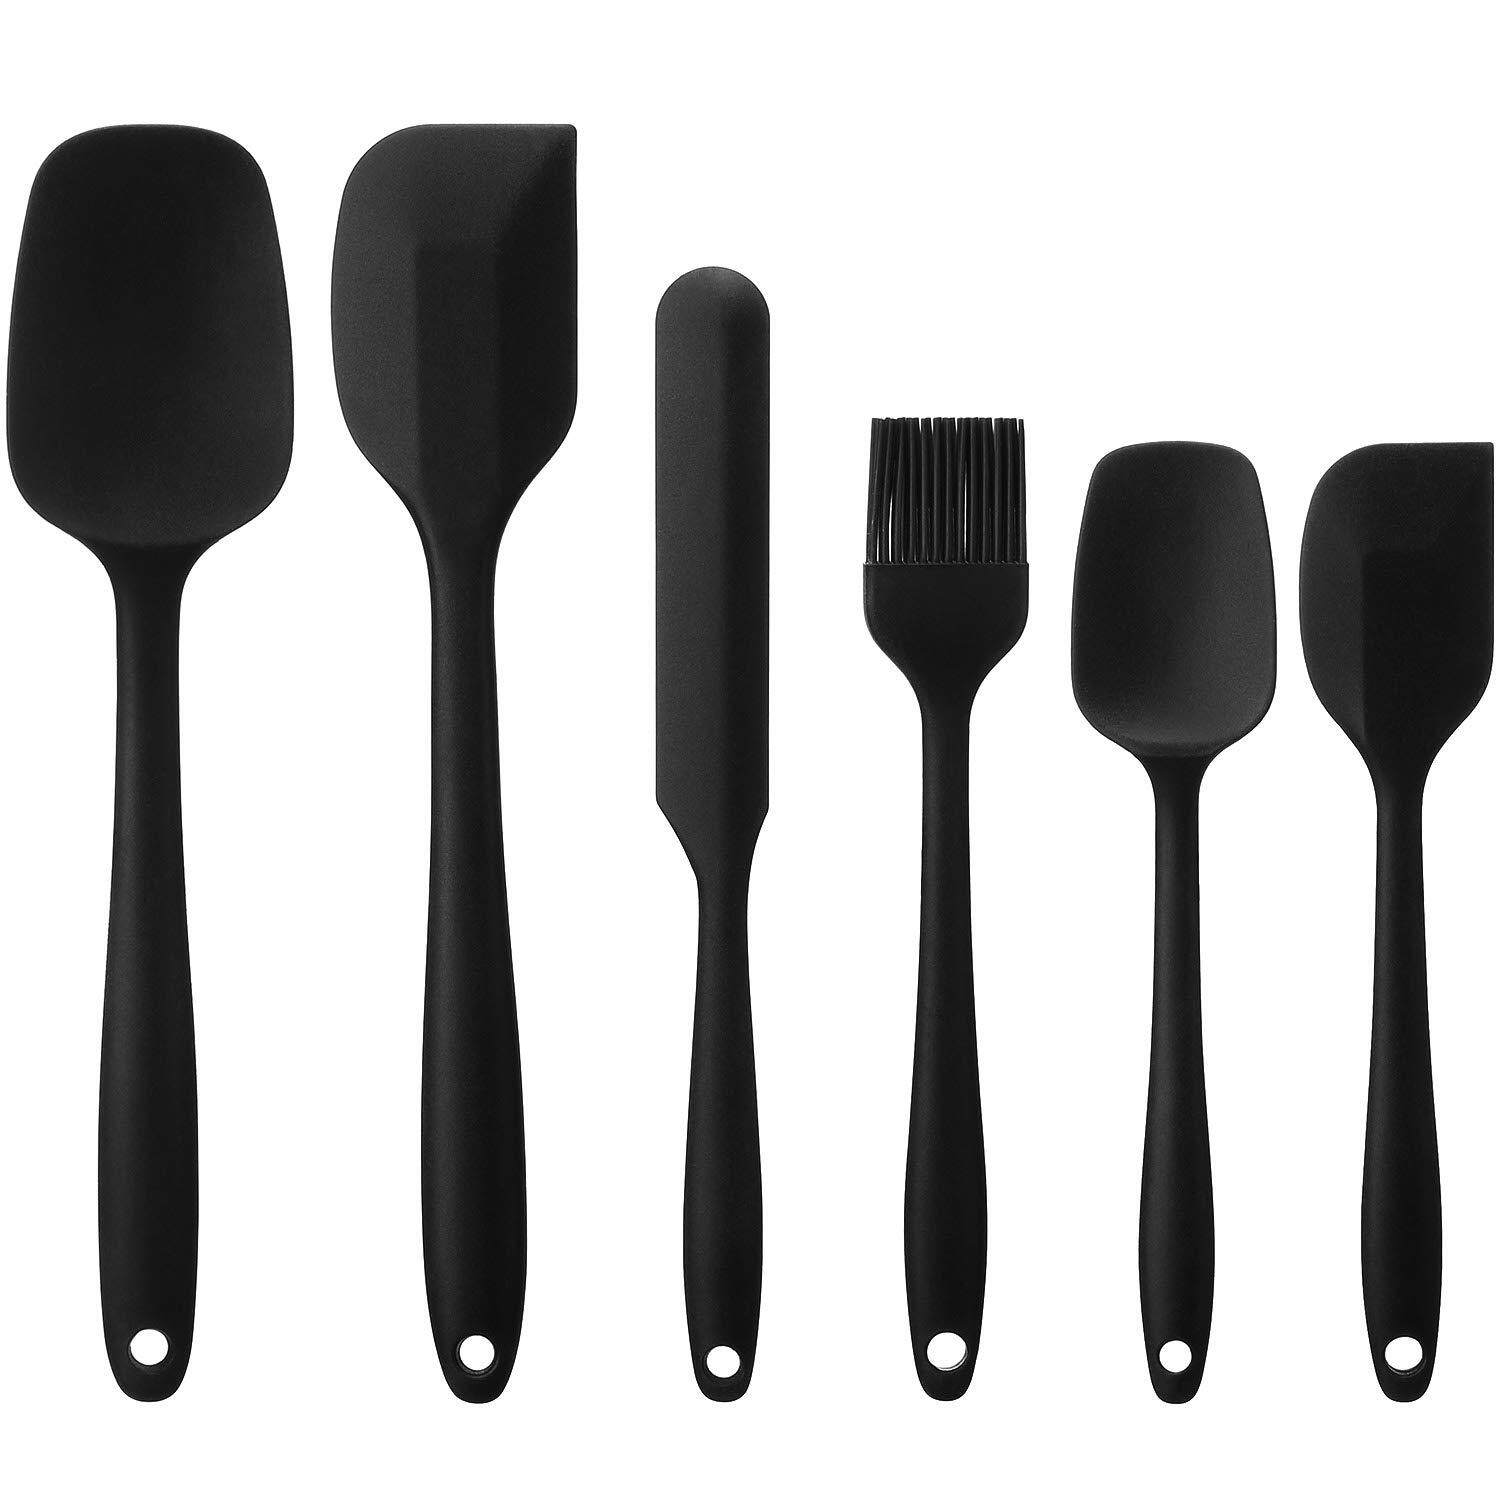 Set of 4 8 inch Silicone Spatula Set,FDA Grade High Temperature and Heat Resistant Spatulas Non-stick with Stainless Steel Core,for Baking,Cooking,Scraping Dish-wash Safe Rubber Kitchen Spatulas